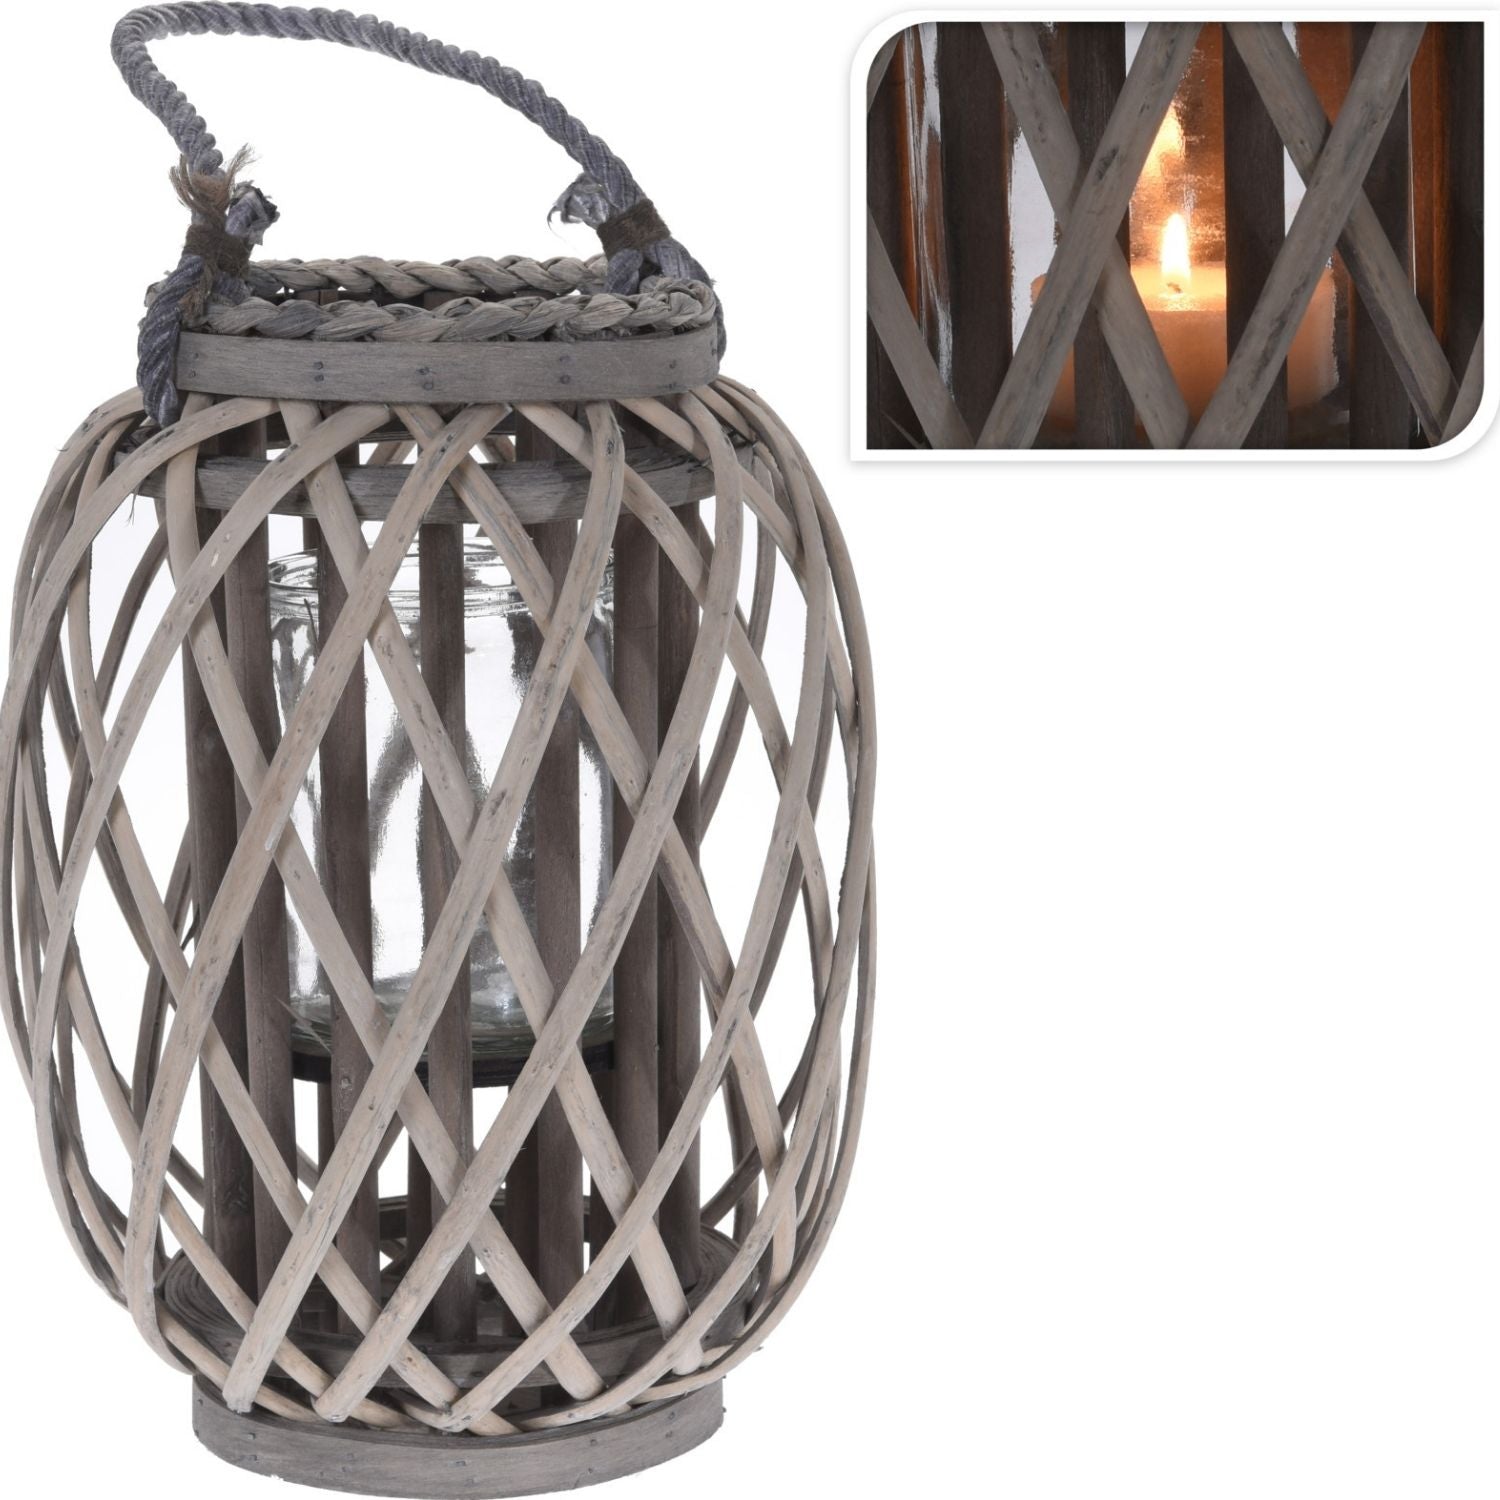 The Home Collection Lantern - Split Willow 1 Shaws Department Stores